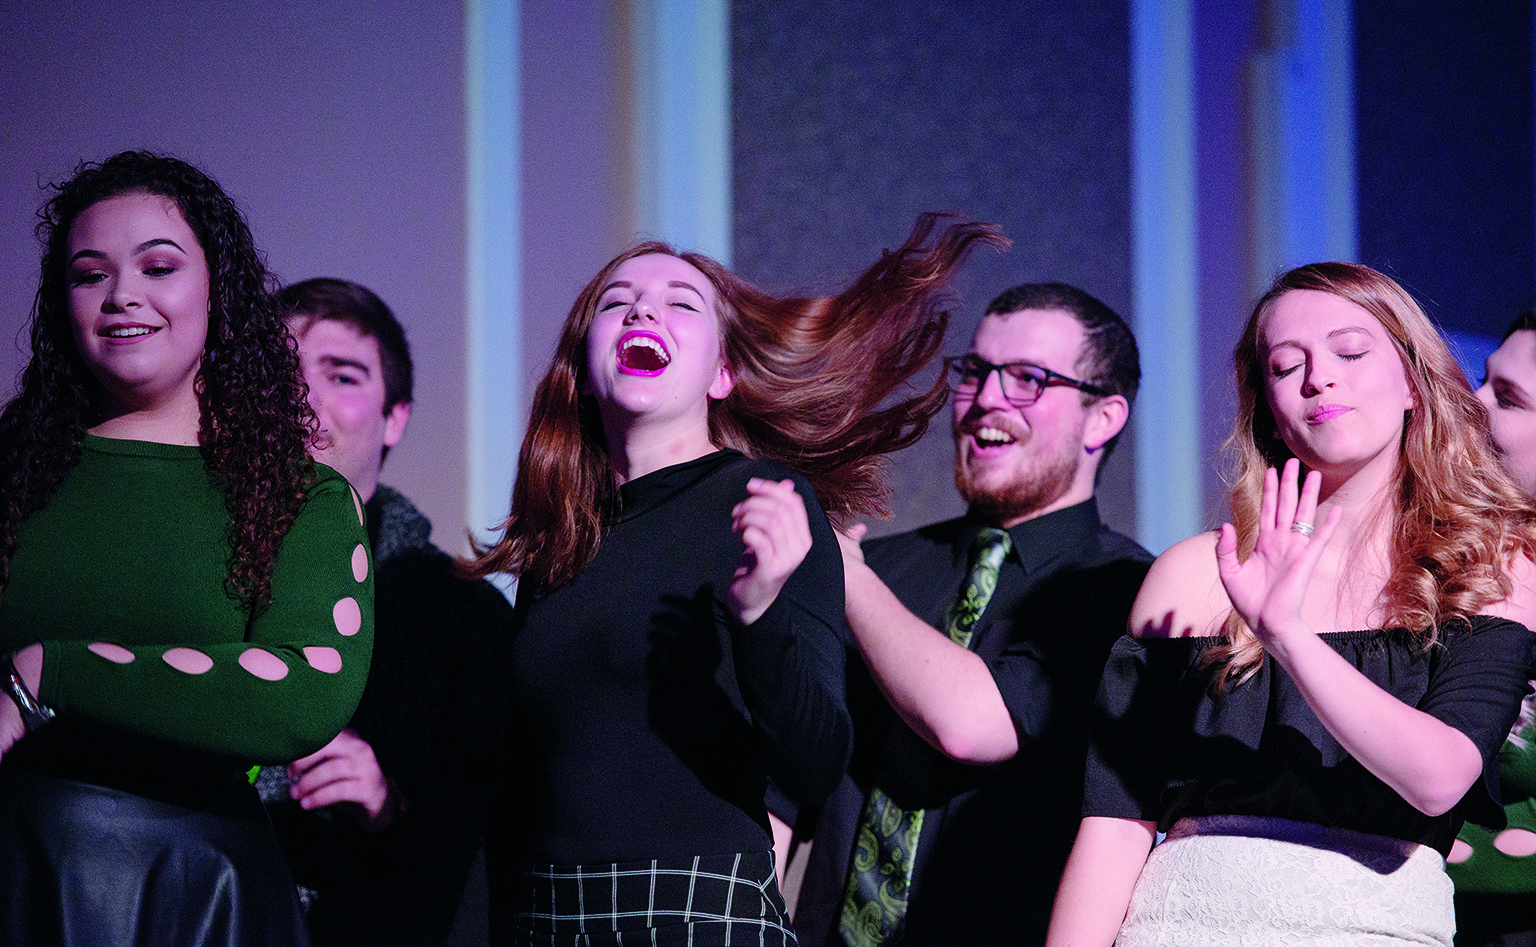 Students from an Ohio University’s a cappella singing group